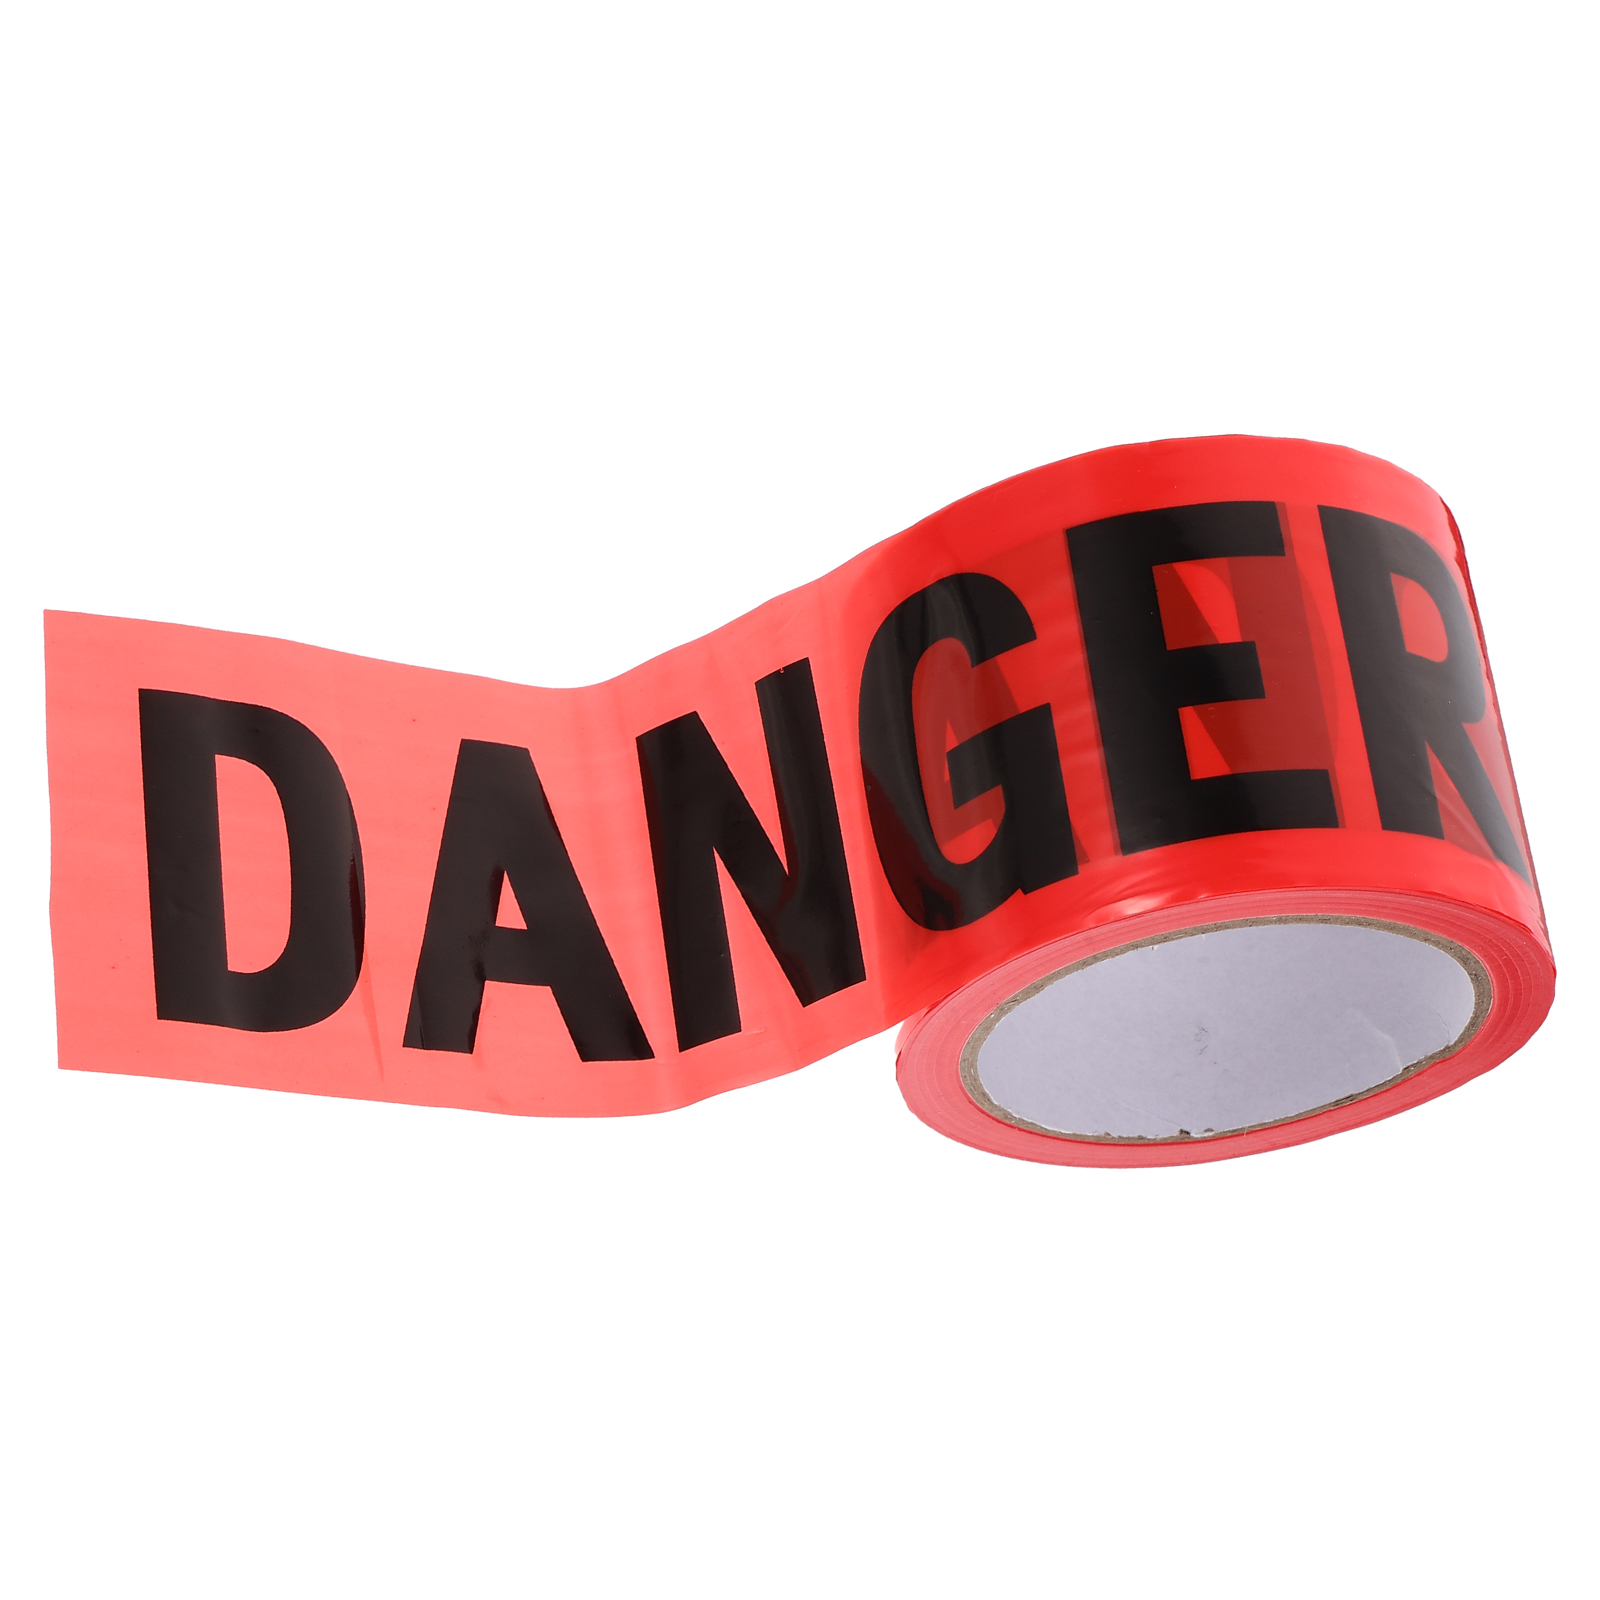 Non-adhesive Danger Tape for Crime Scene Caution Decor Halloween Safety Belt Red - image 1 of 6